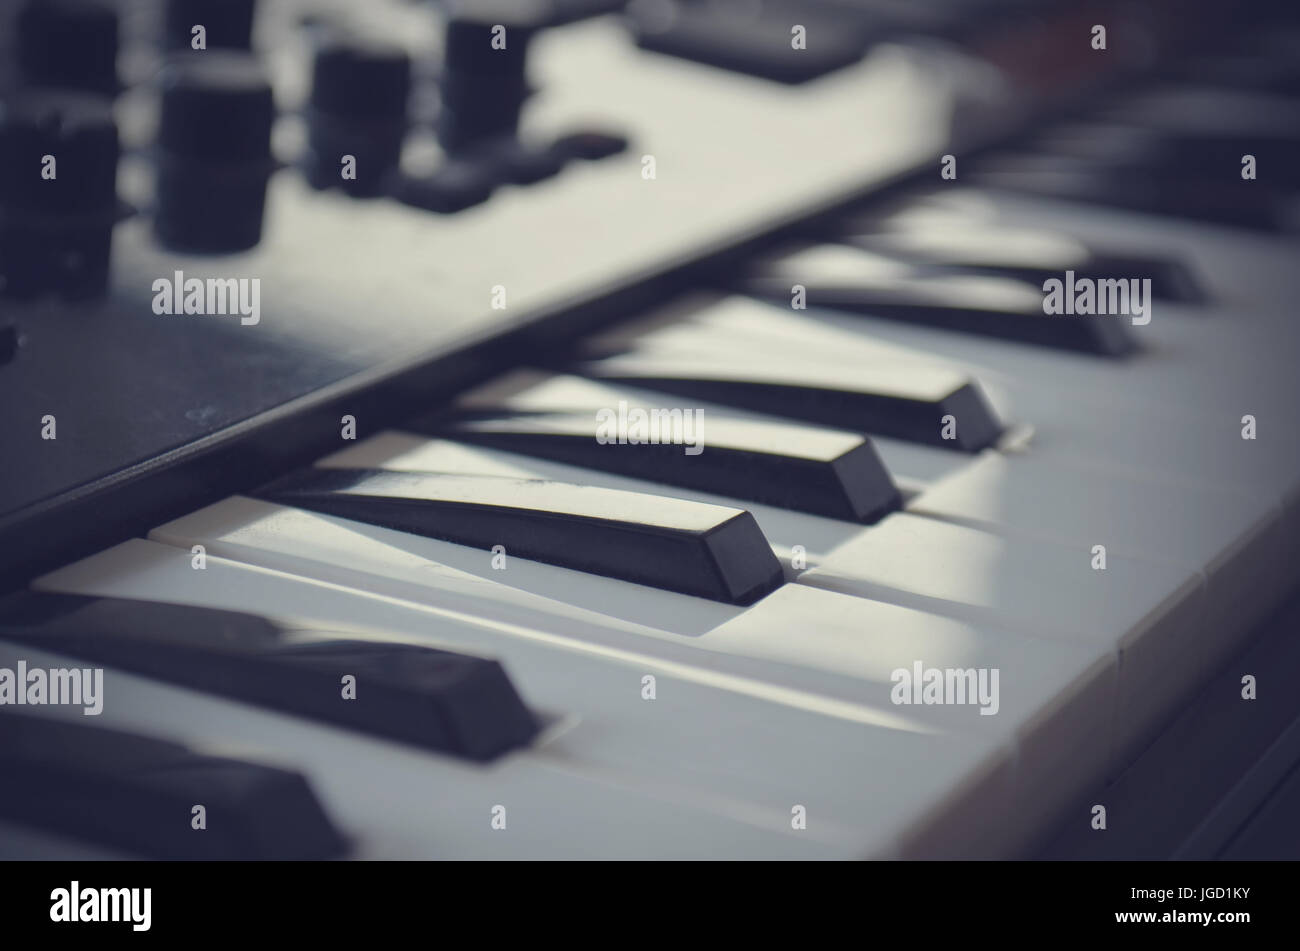 Piano or electone midi keyboard, electronic musical synthesizer white and black key. Vintage effect, instagram filter style. Stock Photo